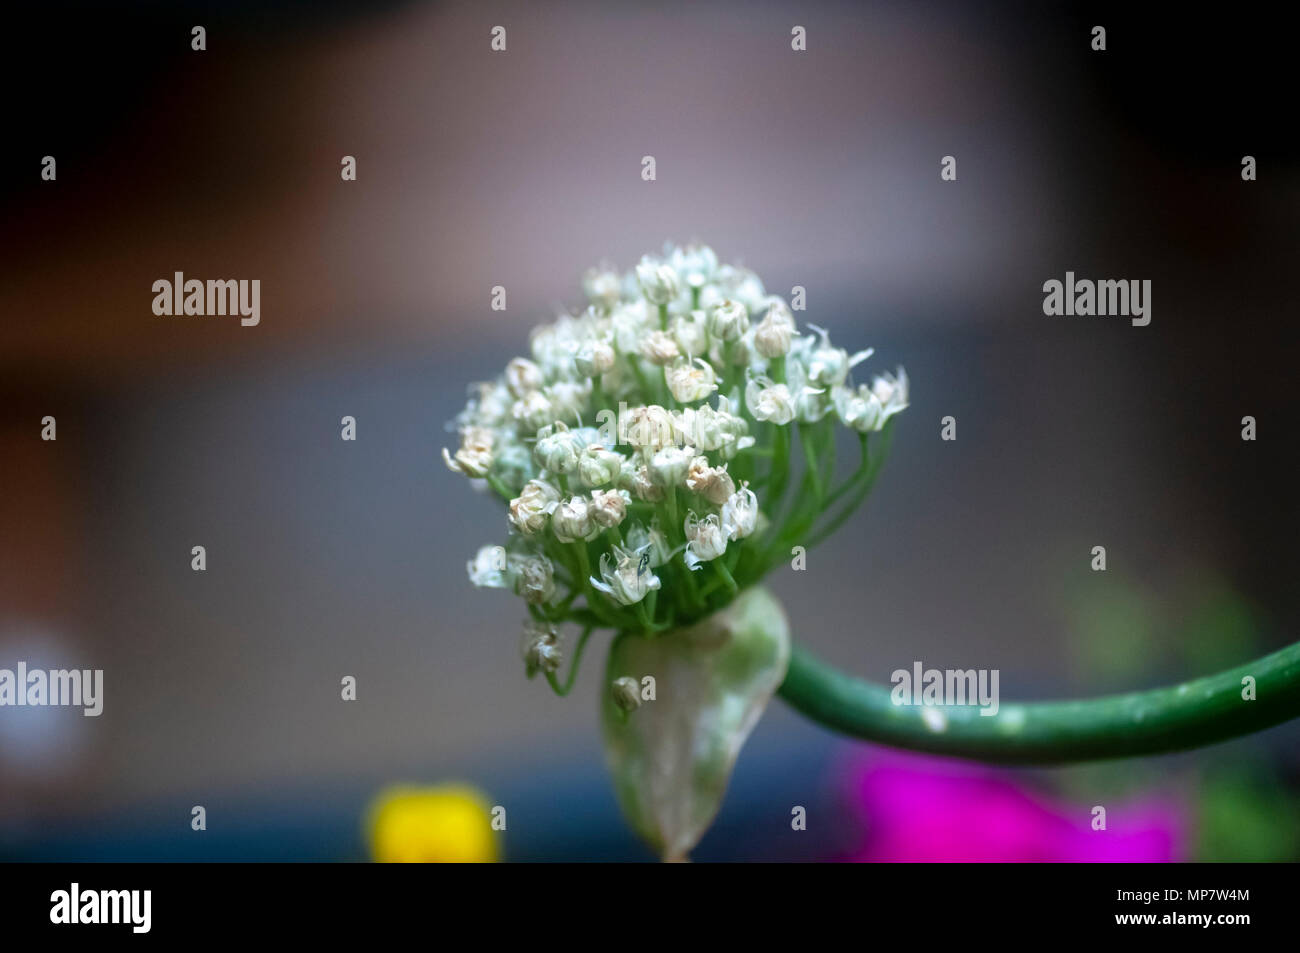 Flowerhead of an Onion (Allium sp.) Photographed in May Stock Photo